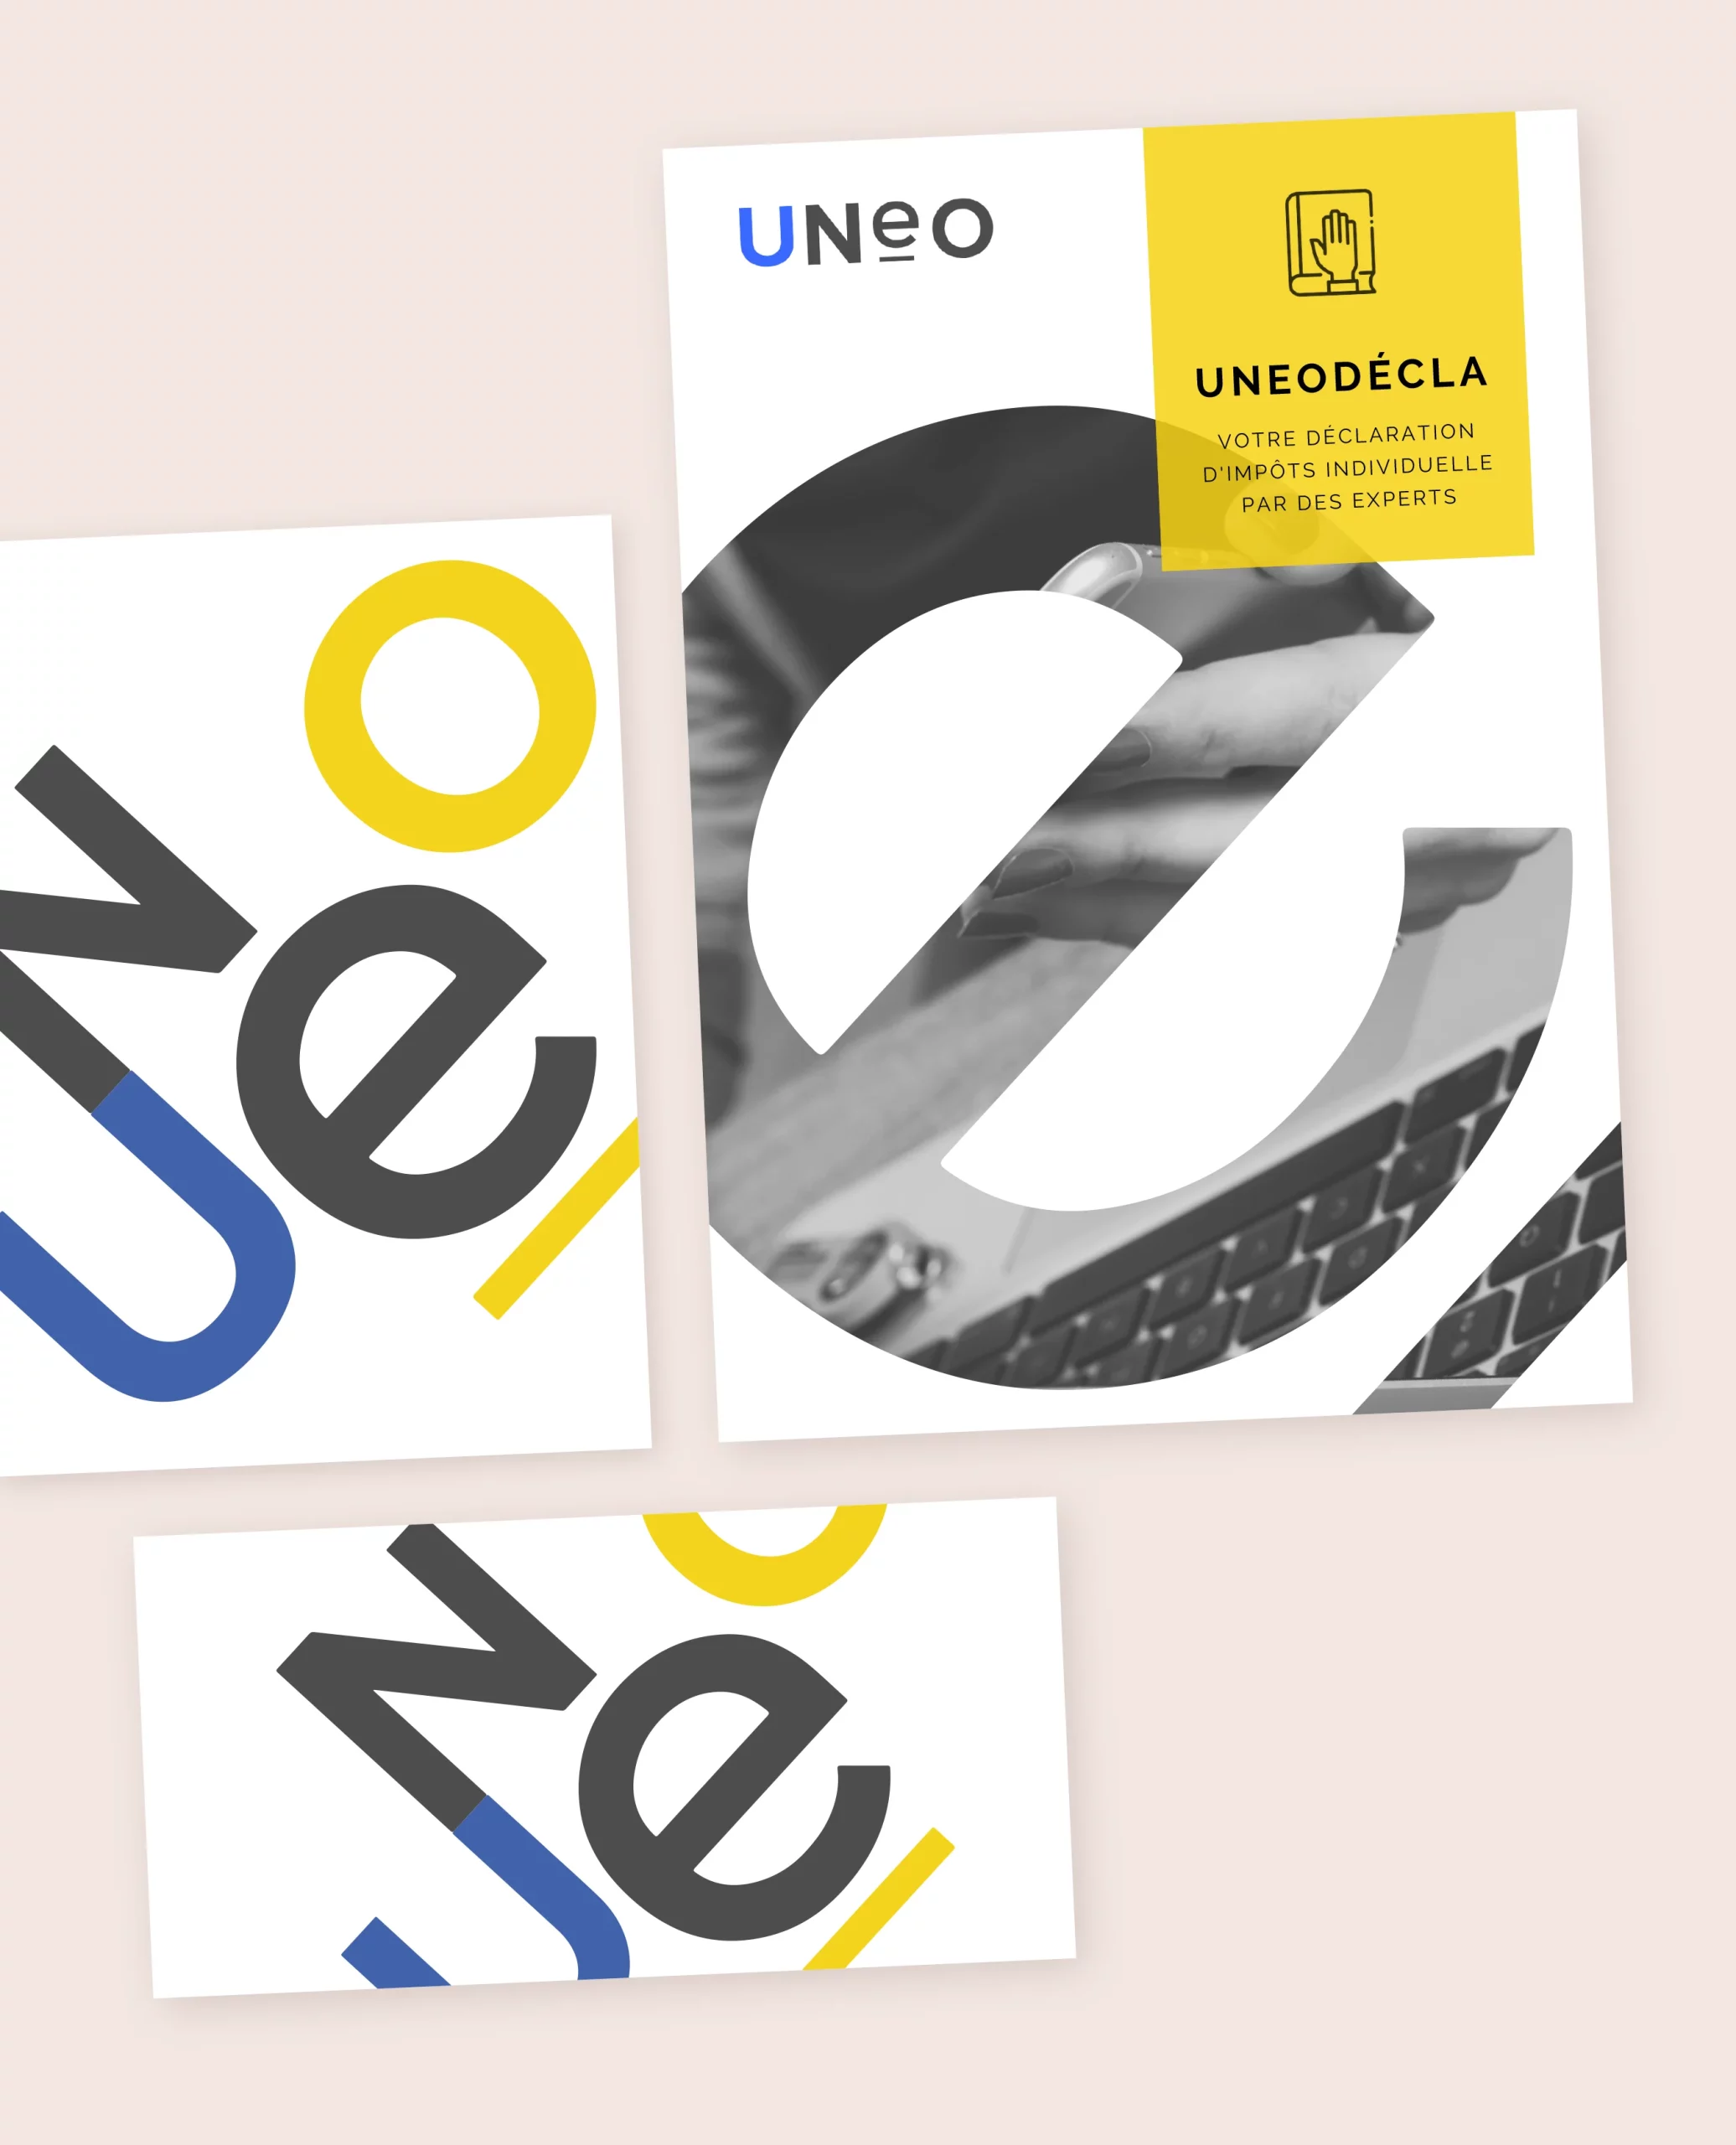 Branding charte graphique Geneve Agence Communication UNEO 2 scaled